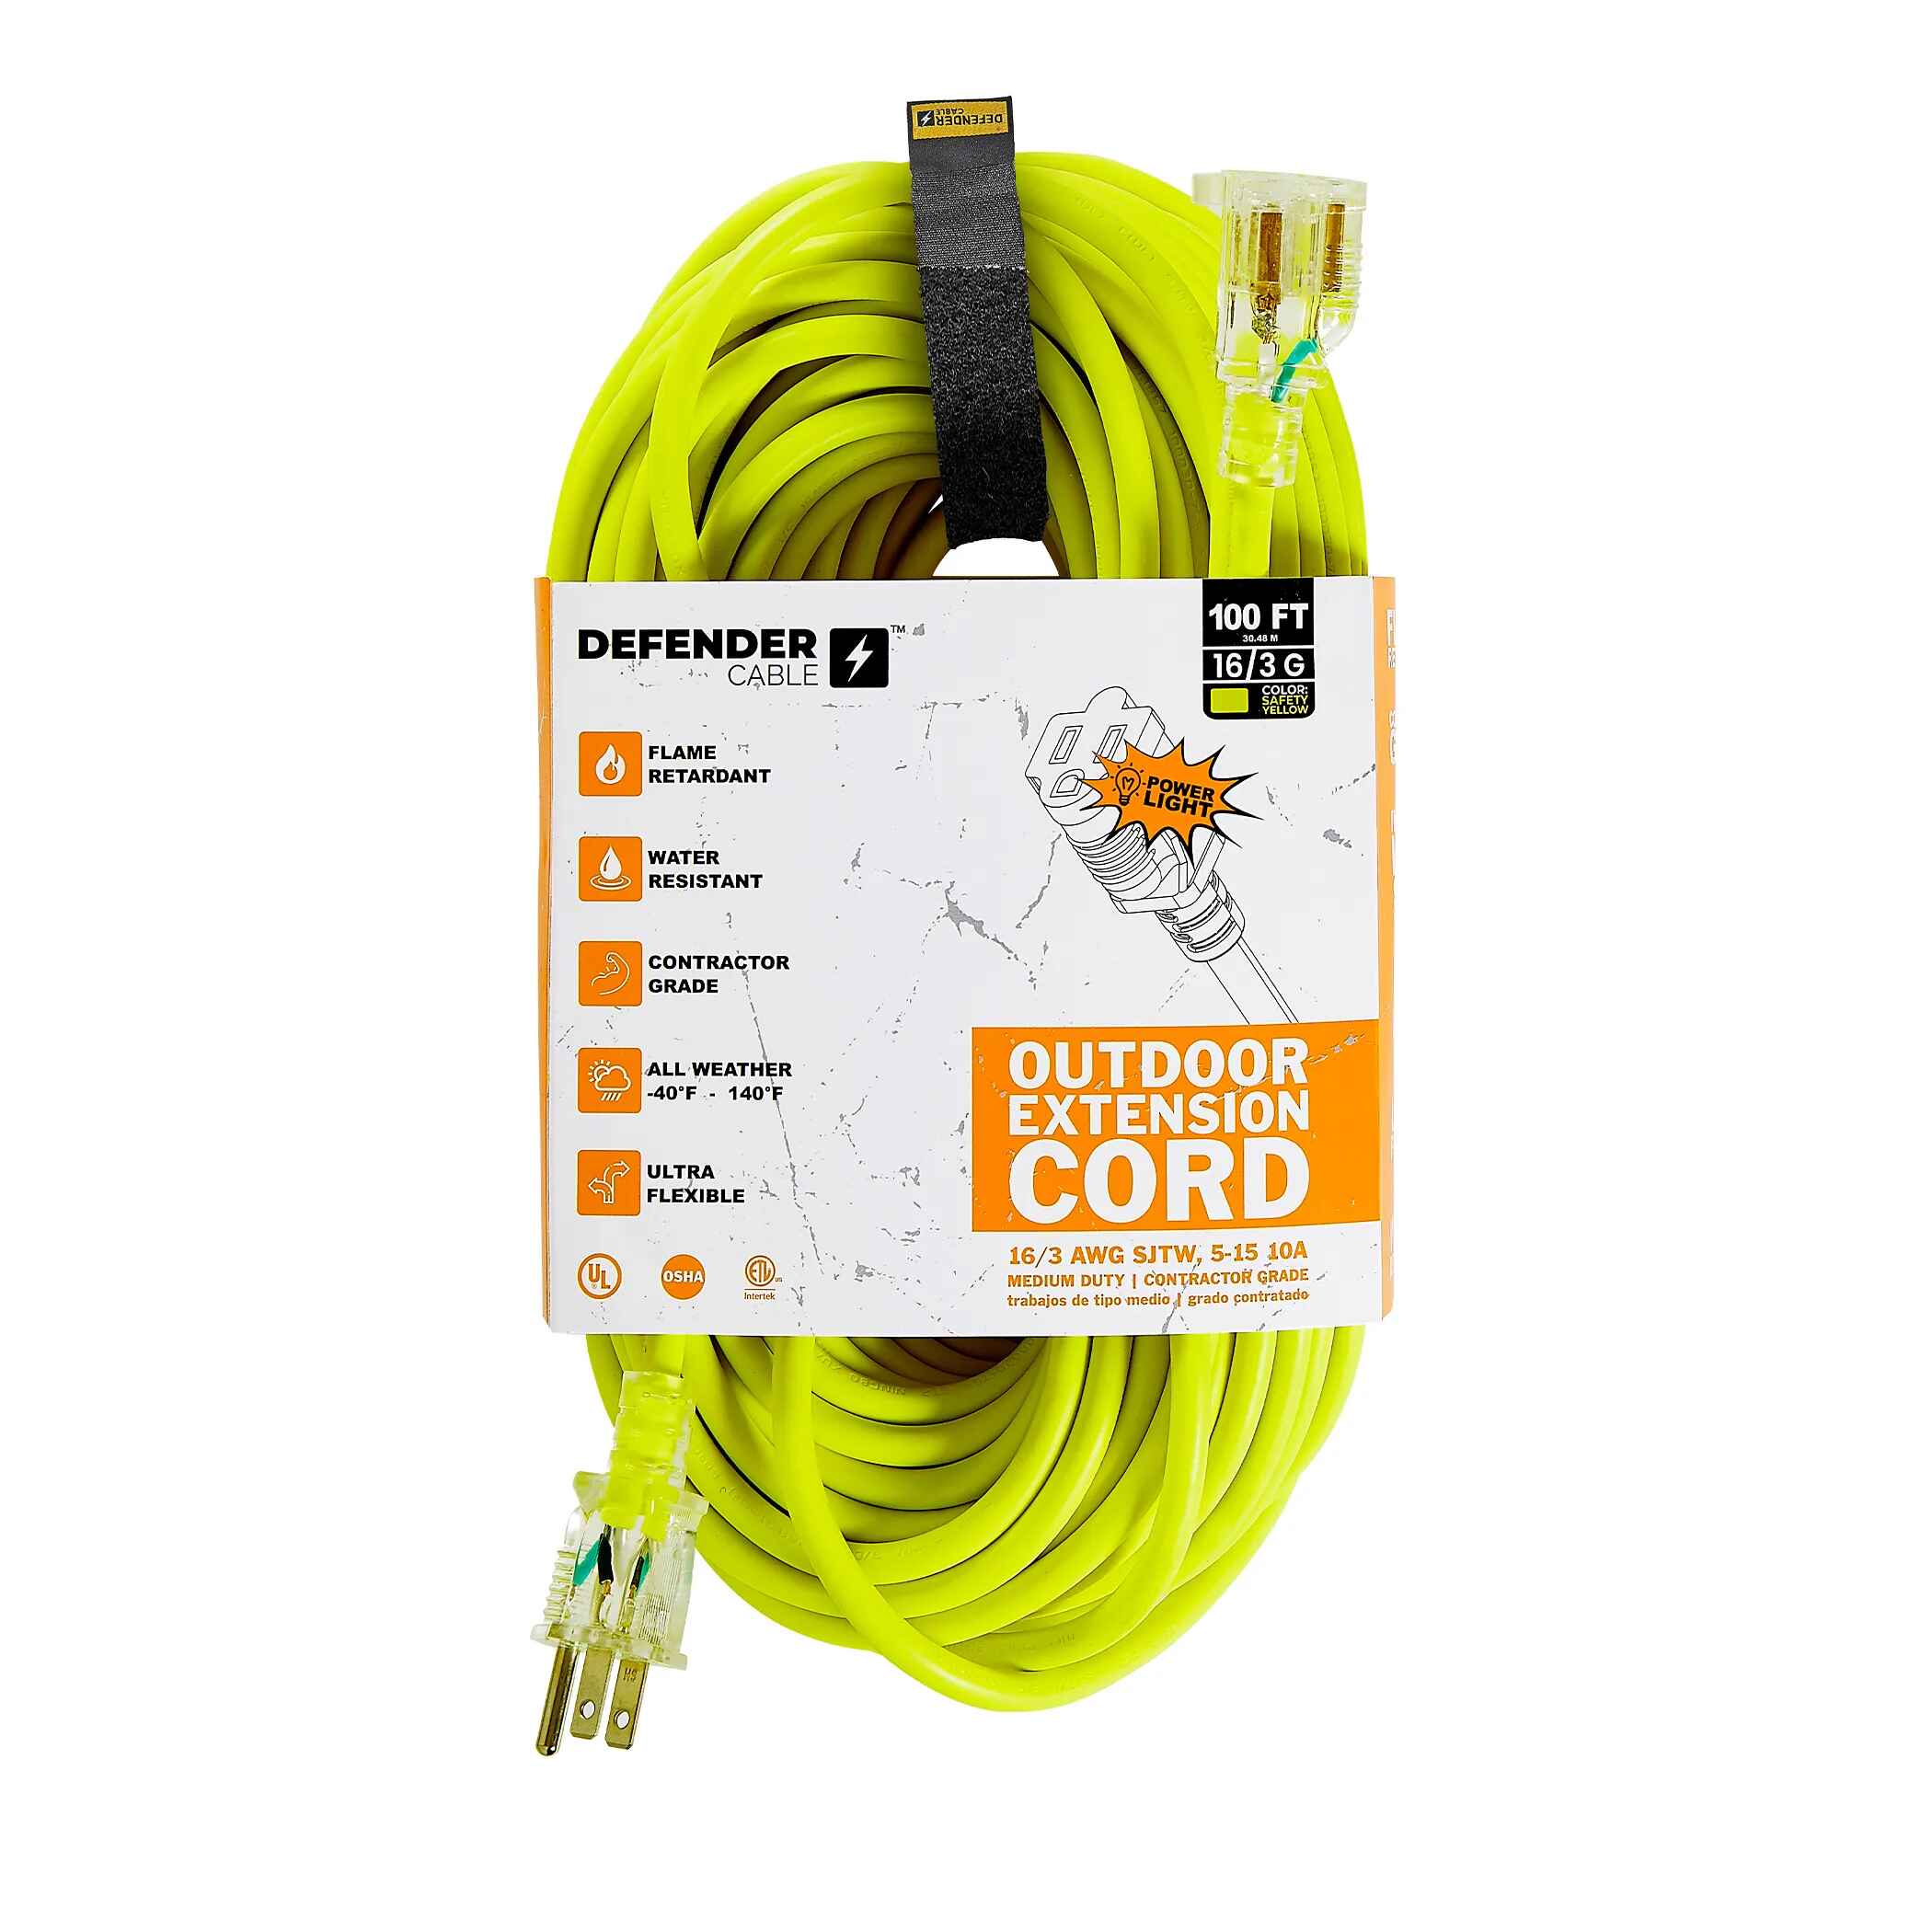 ROYU FLAT CORD WIRE #16 150M/BOX - One-Stop Shop Home Improvement